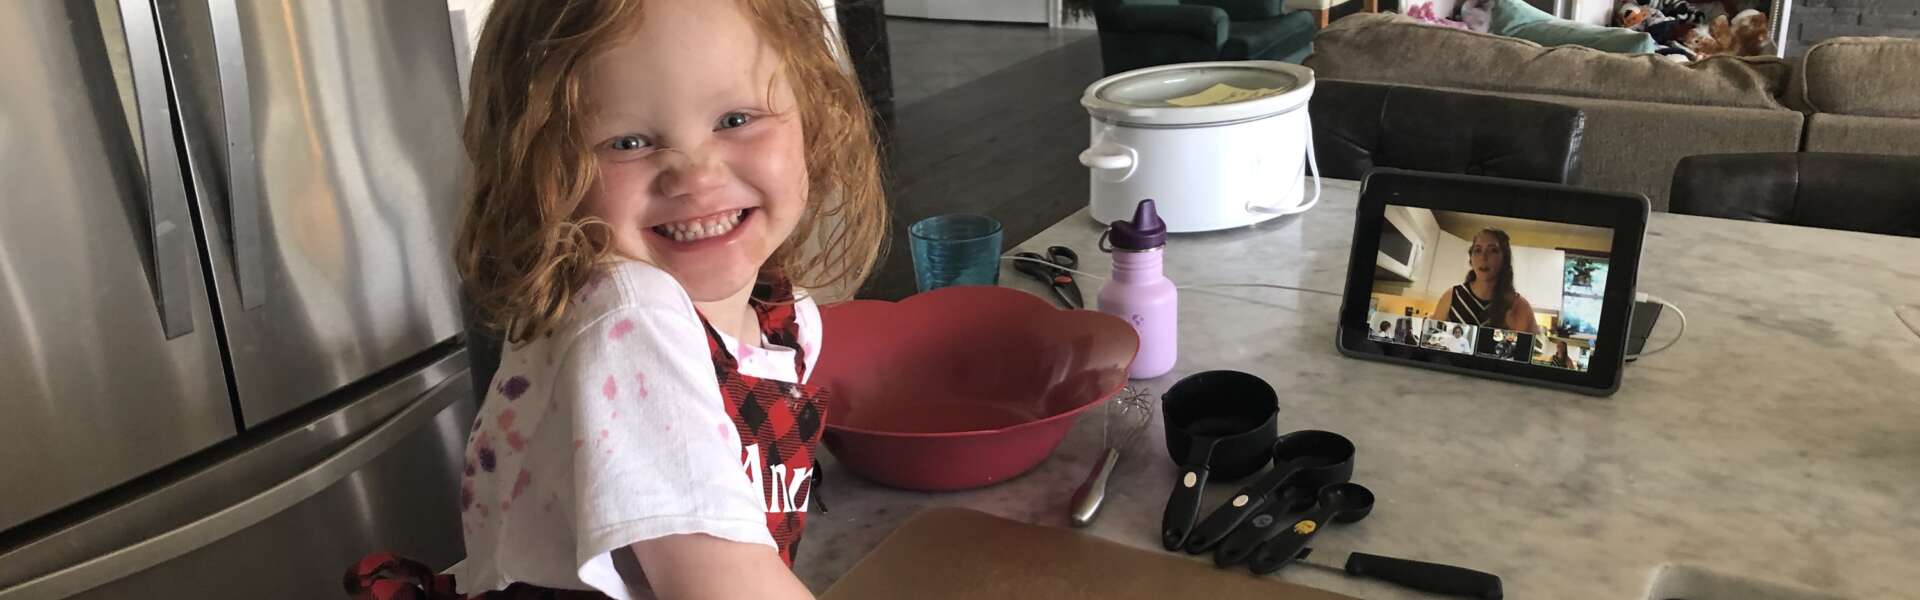 A young girl wearing an apron smiles at the camers while standing at a kitchen counter with a recipe and baking utensils in front of her